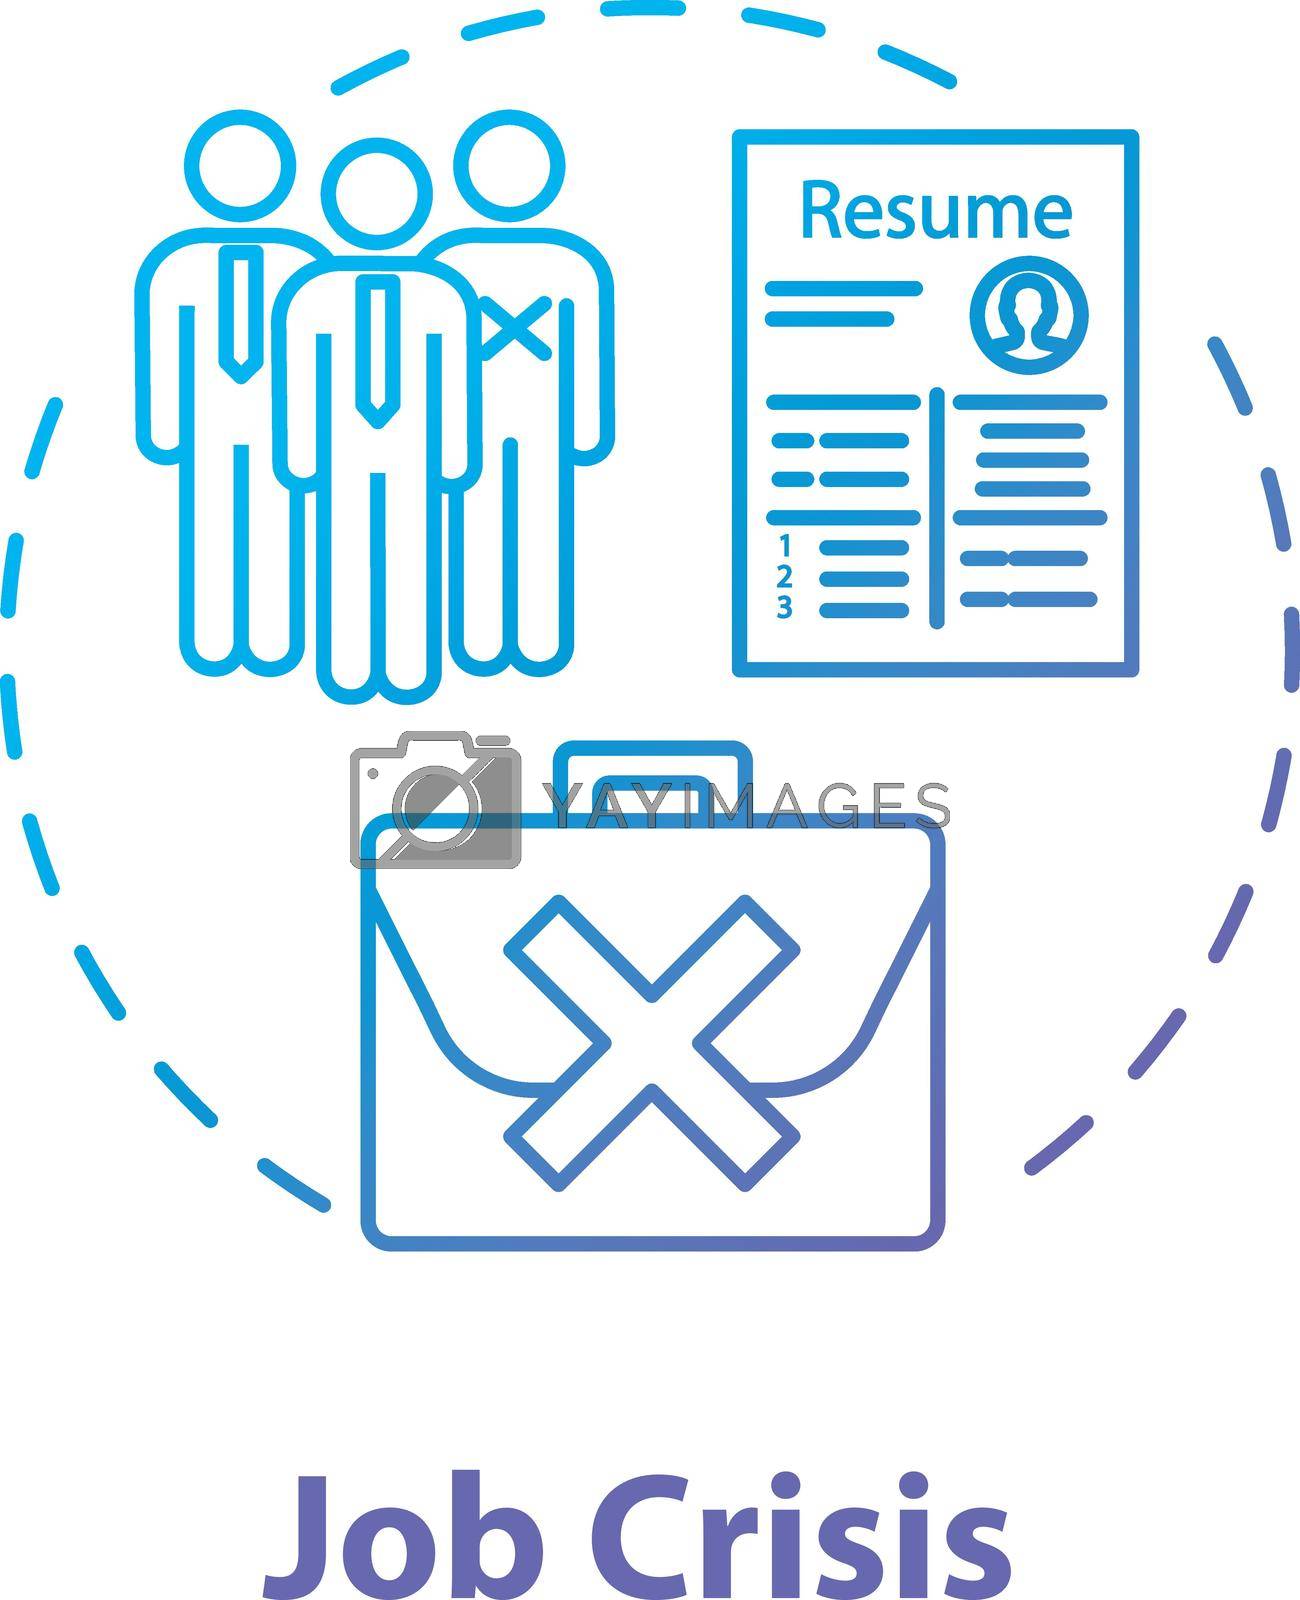 Royalty free image of Job crisis concept icon by bsd